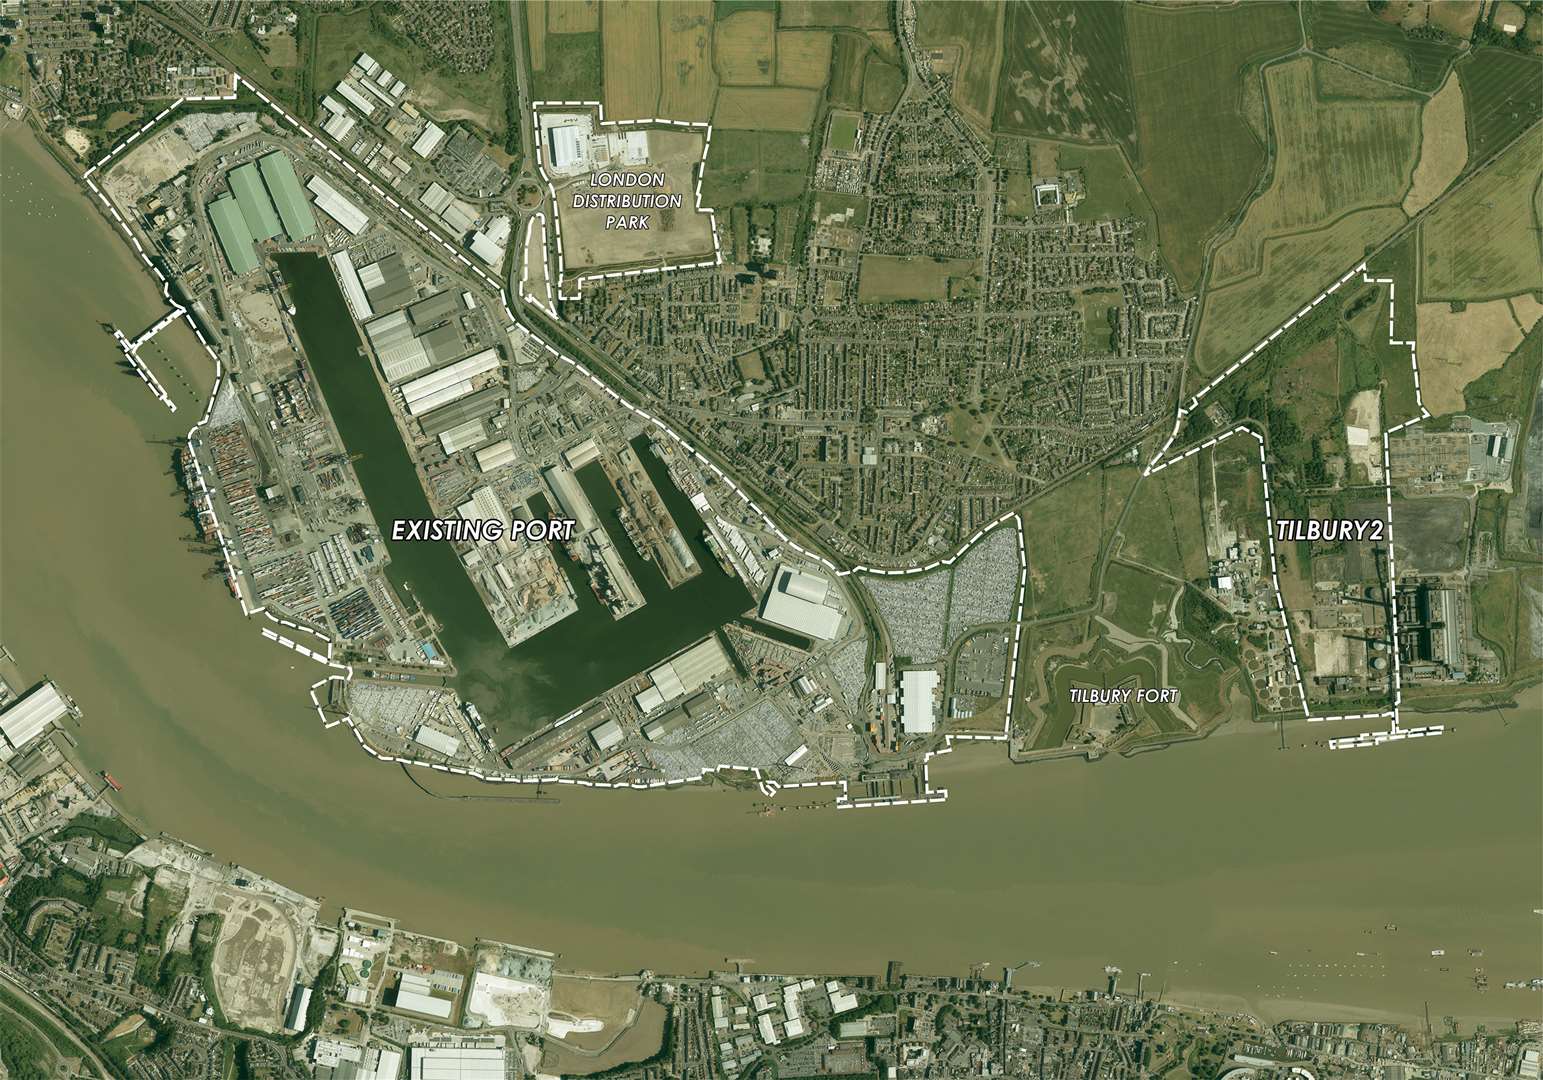 Plans for Tilbury2 - the new port on the site of Tilbury Power Station.